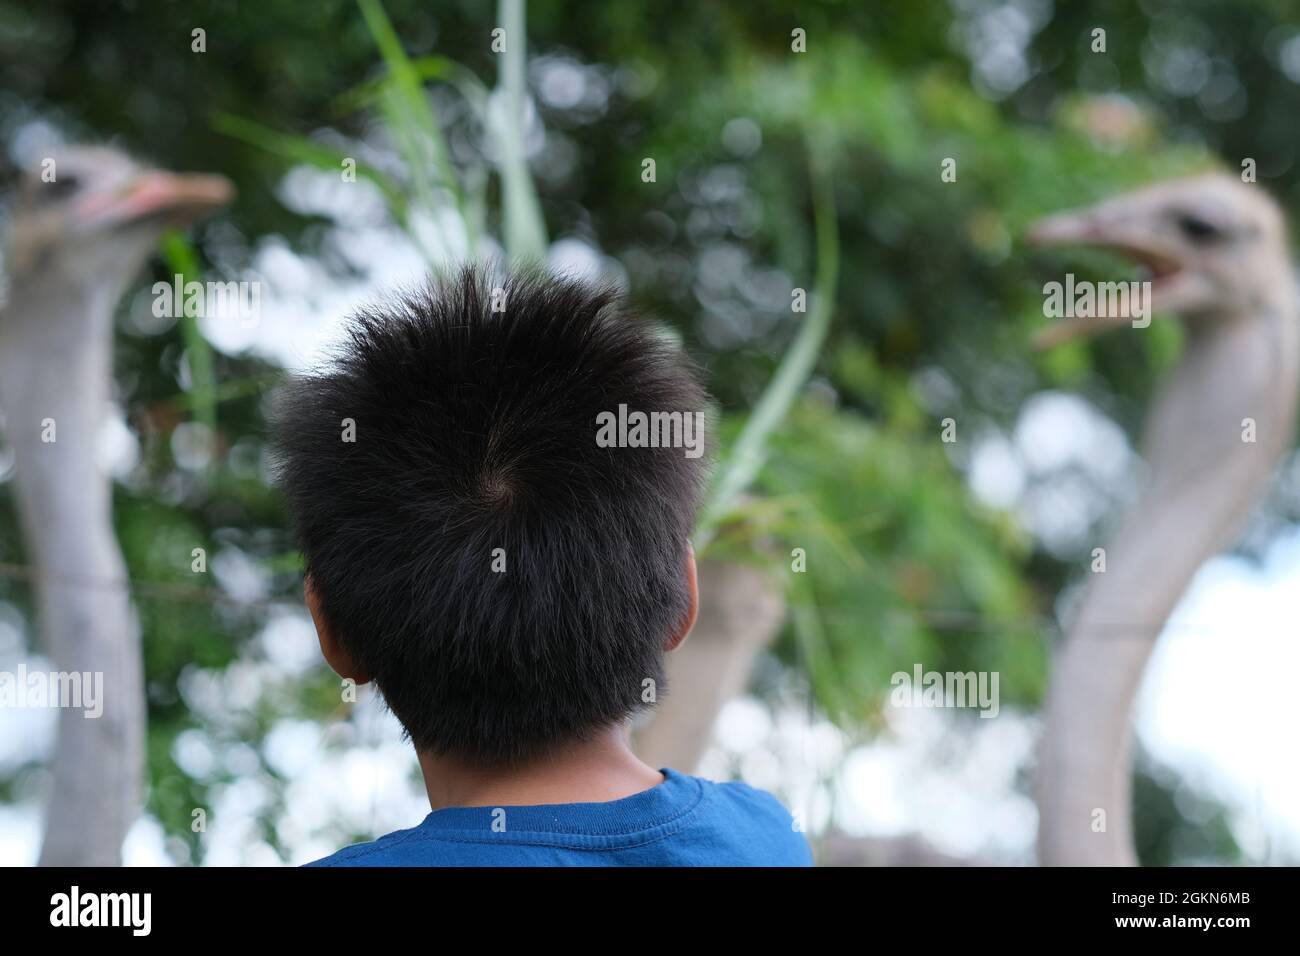 Two ostriches, obviously fighting for food, with their open beaks over the head of young boy Stock Photo